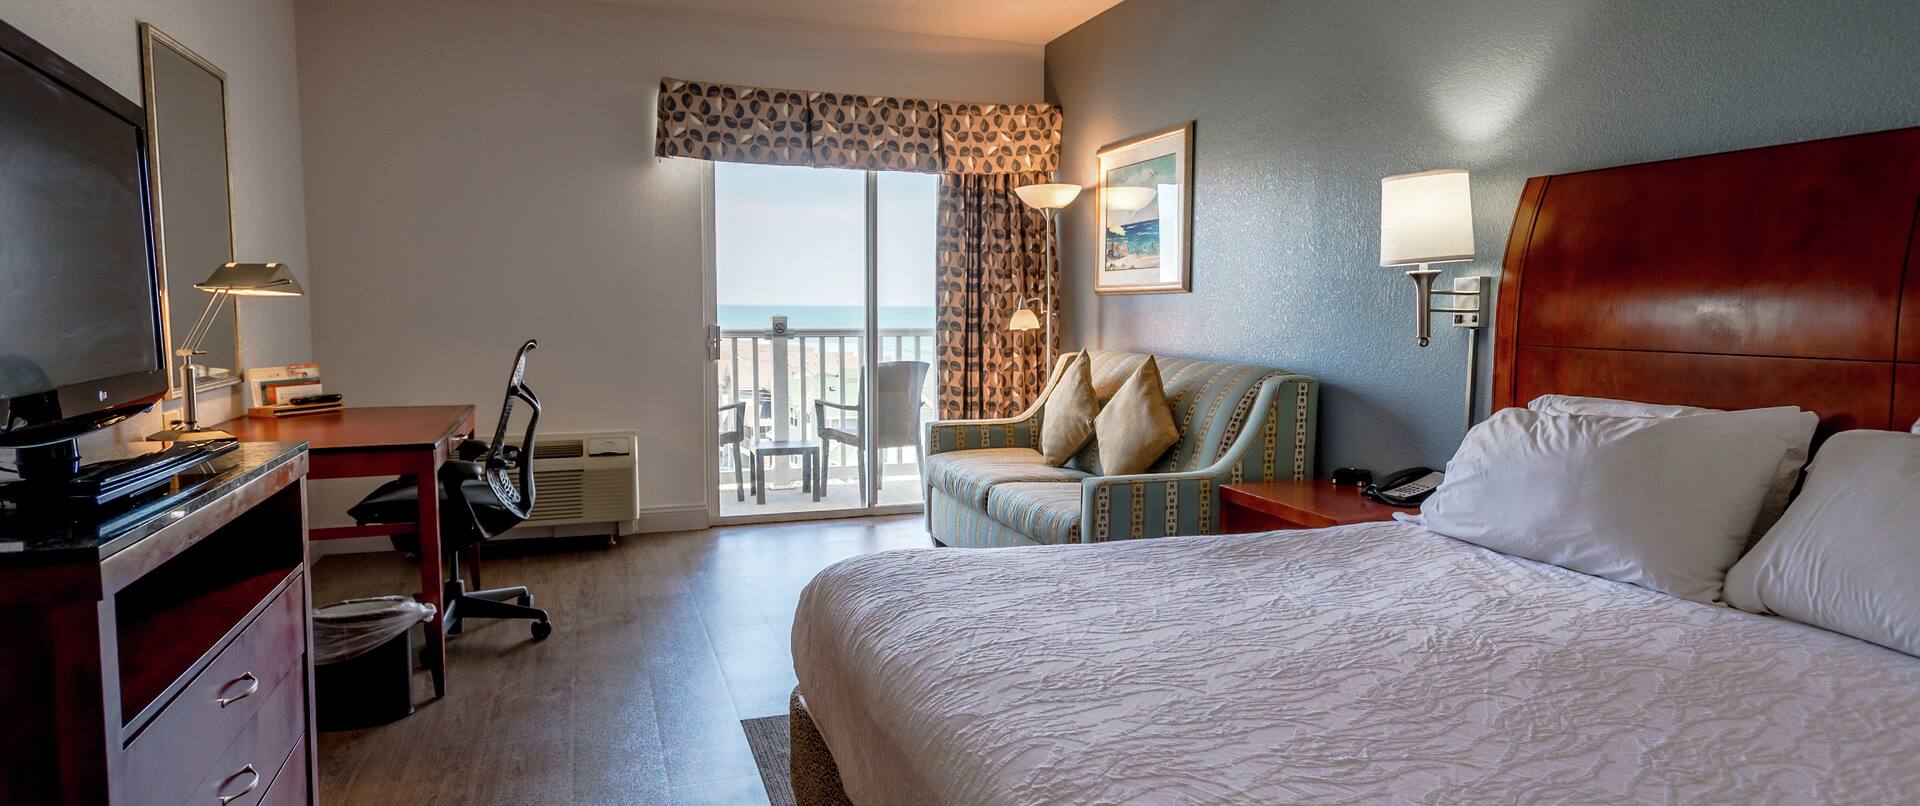 King Guestroom with Bed, Room Technology, Work Desk, Lounge Area, and Patio with Oceanview